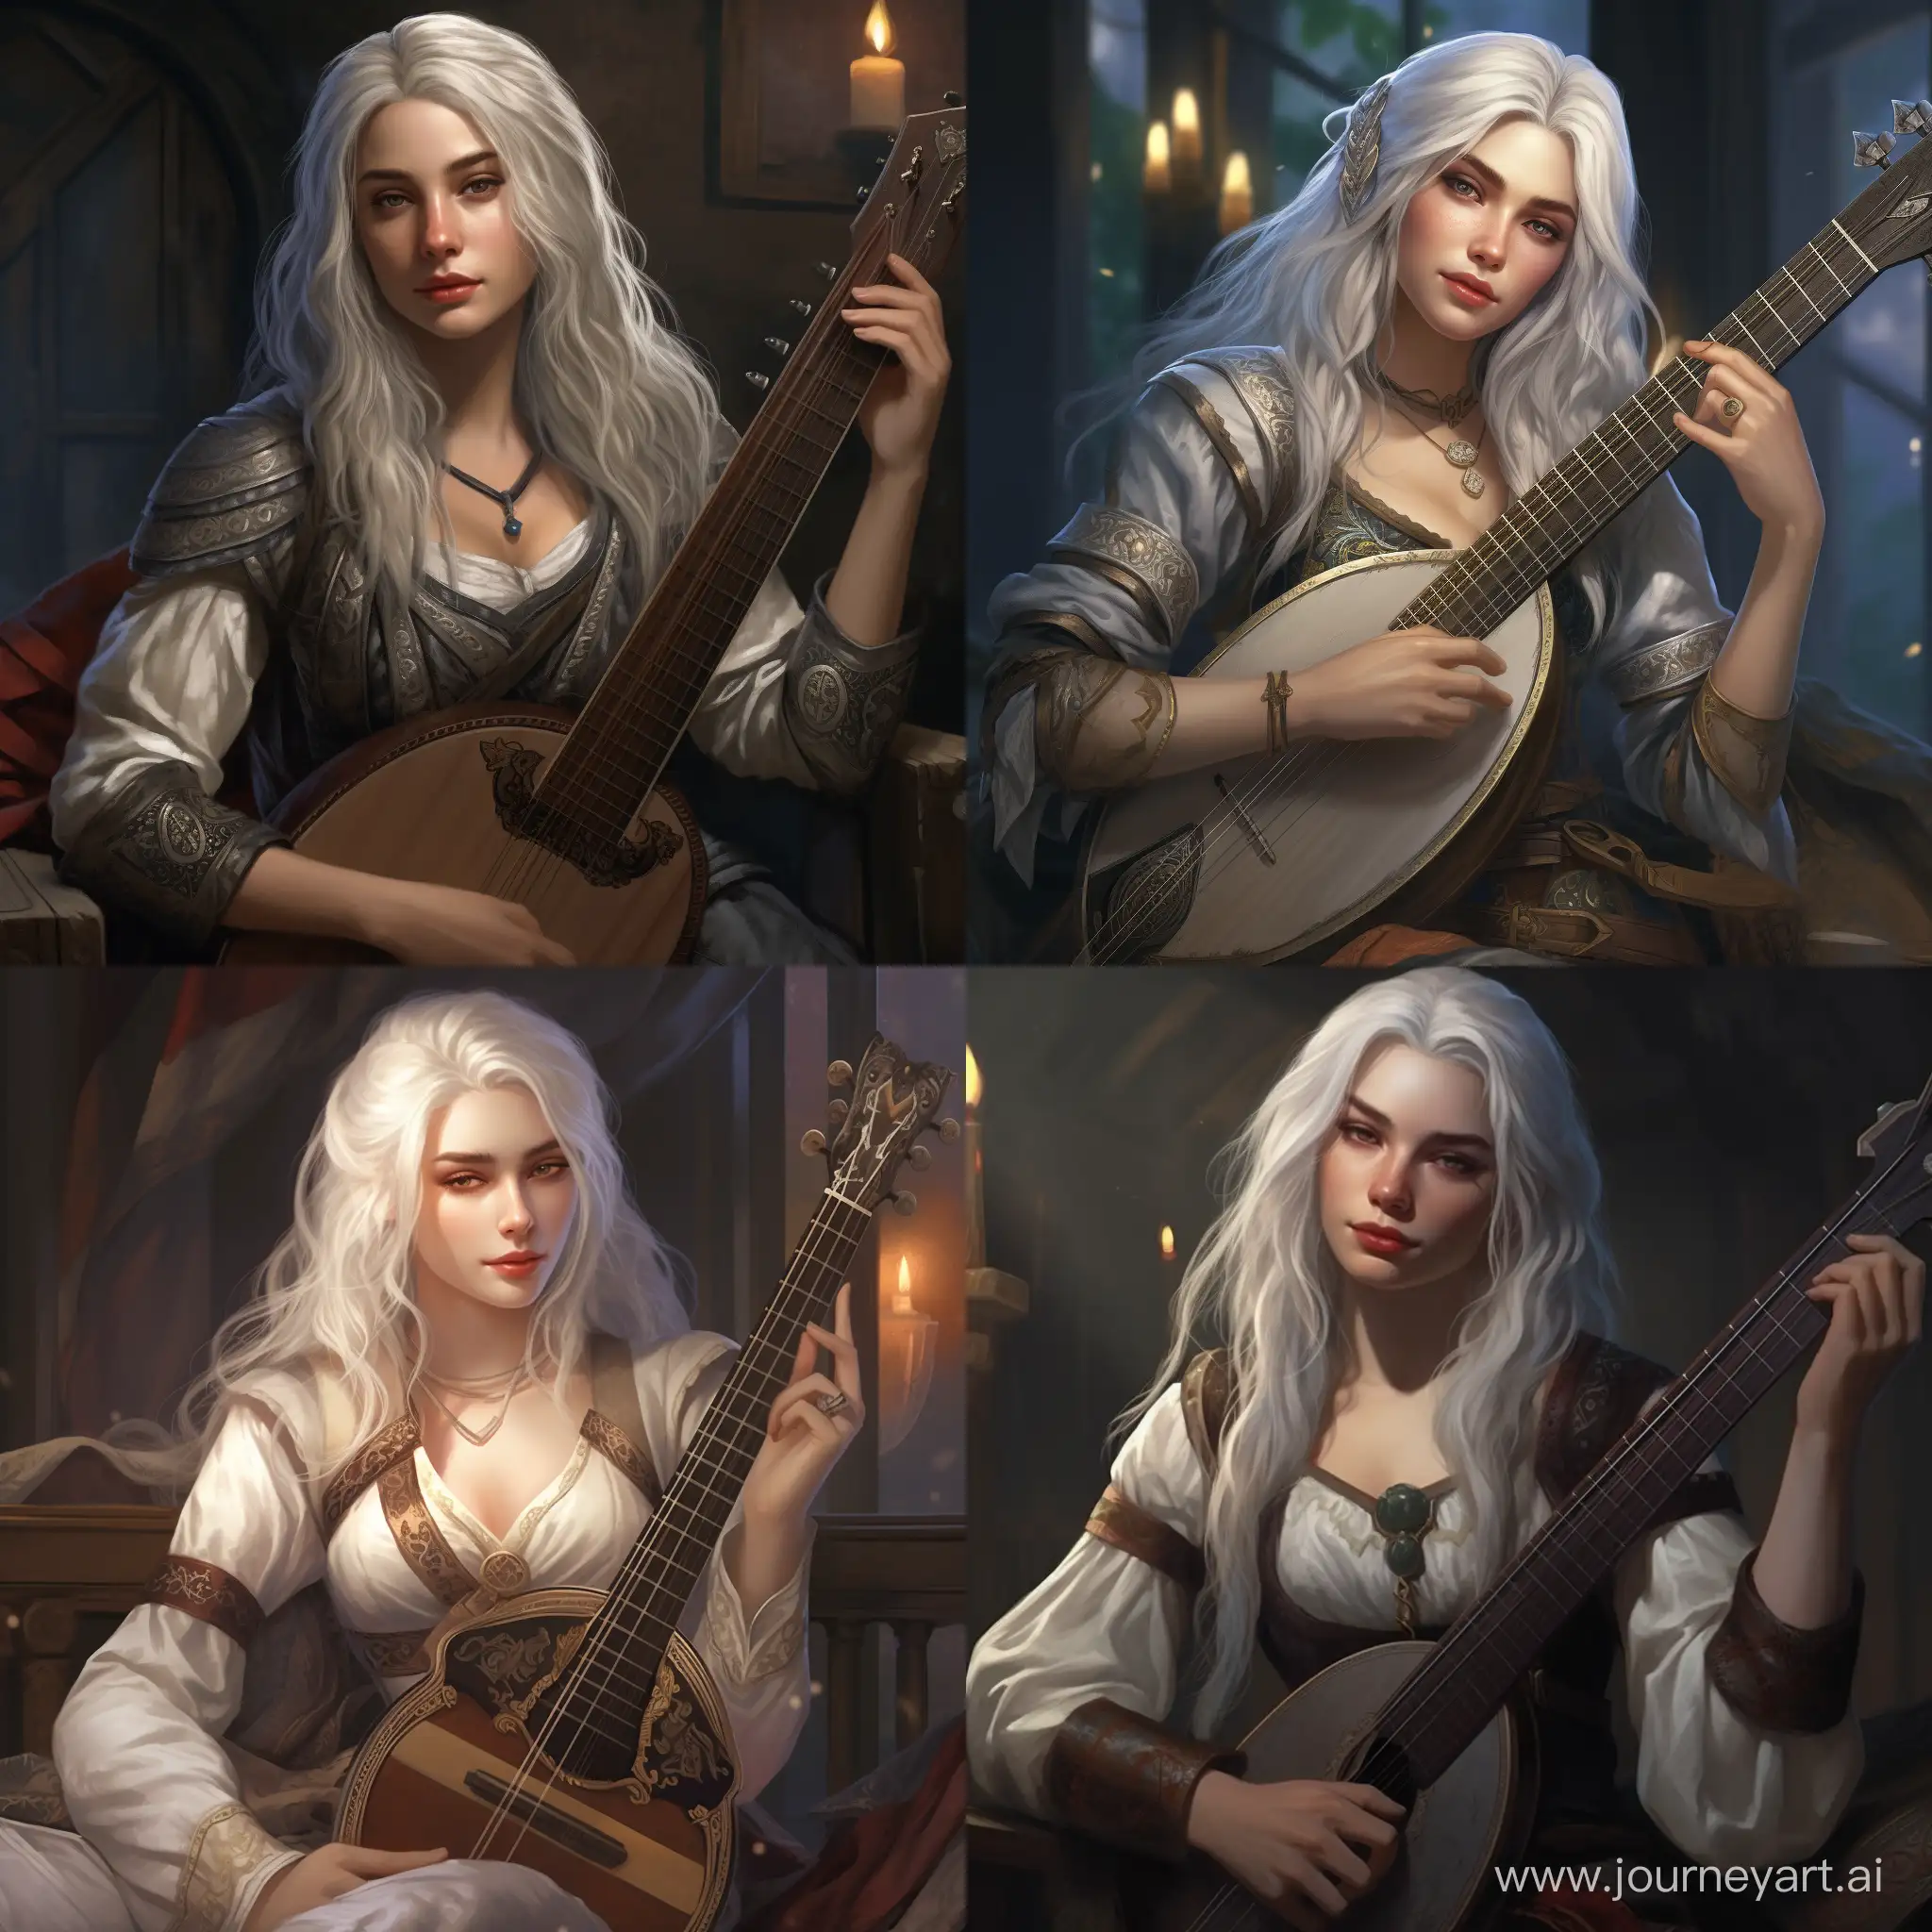 SilverHaired-Female-Bard-Playing-Lute-in-a-Medieval-Fantasy-Setting